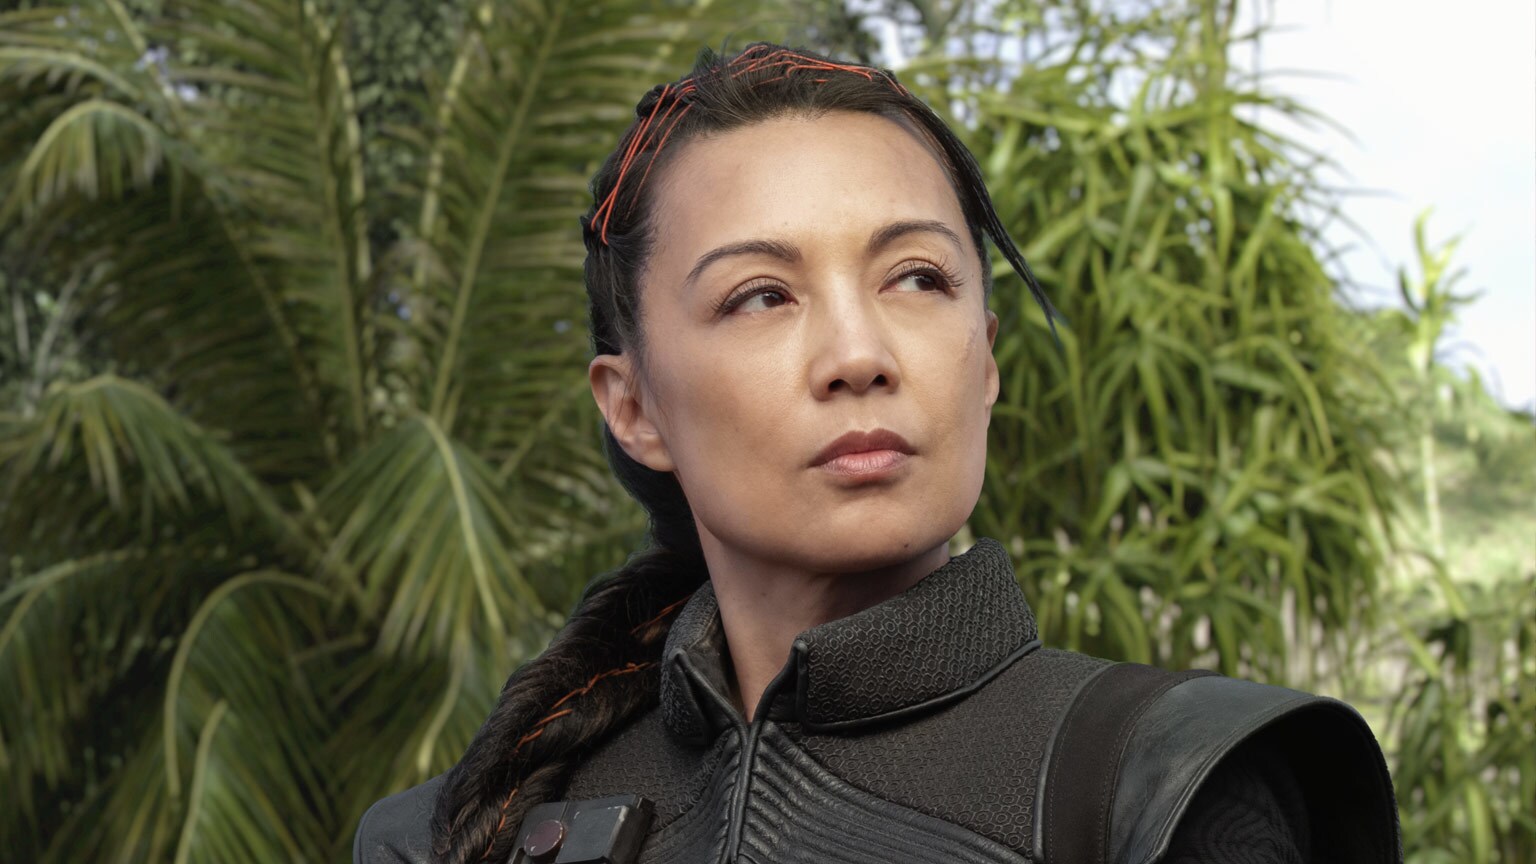 The Return of Fennec Shand: Ming-Na Wen on Finding her Voice as the Elite Assassin in The Mandalorian